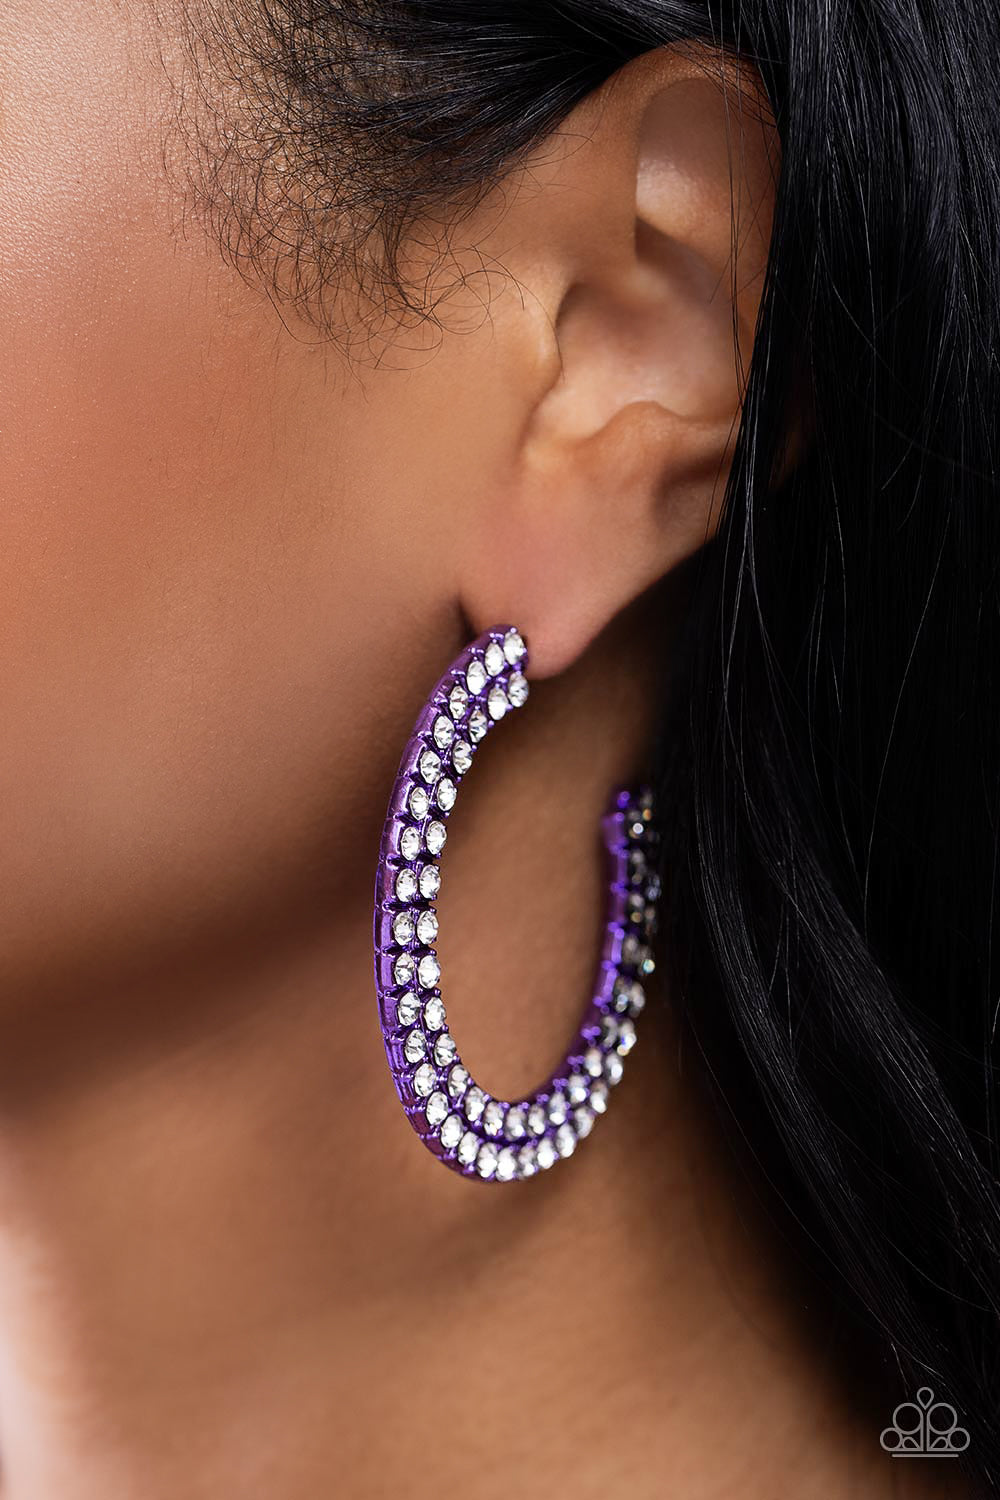 Flawless Fashion Purple Hoop Earring - Paparazzi Accessories  The outer curve of an oversized thick metallic purple hoop is encrusted in a staggered double row of dazzling white rhinestones for a flawless look. Earring attaches to a standard post fitting. Hoop measures approximately 2 1/4" in diameter.  Sold as one pair of hoop earrings.  Sku:  P5HO-PRXX-023XX